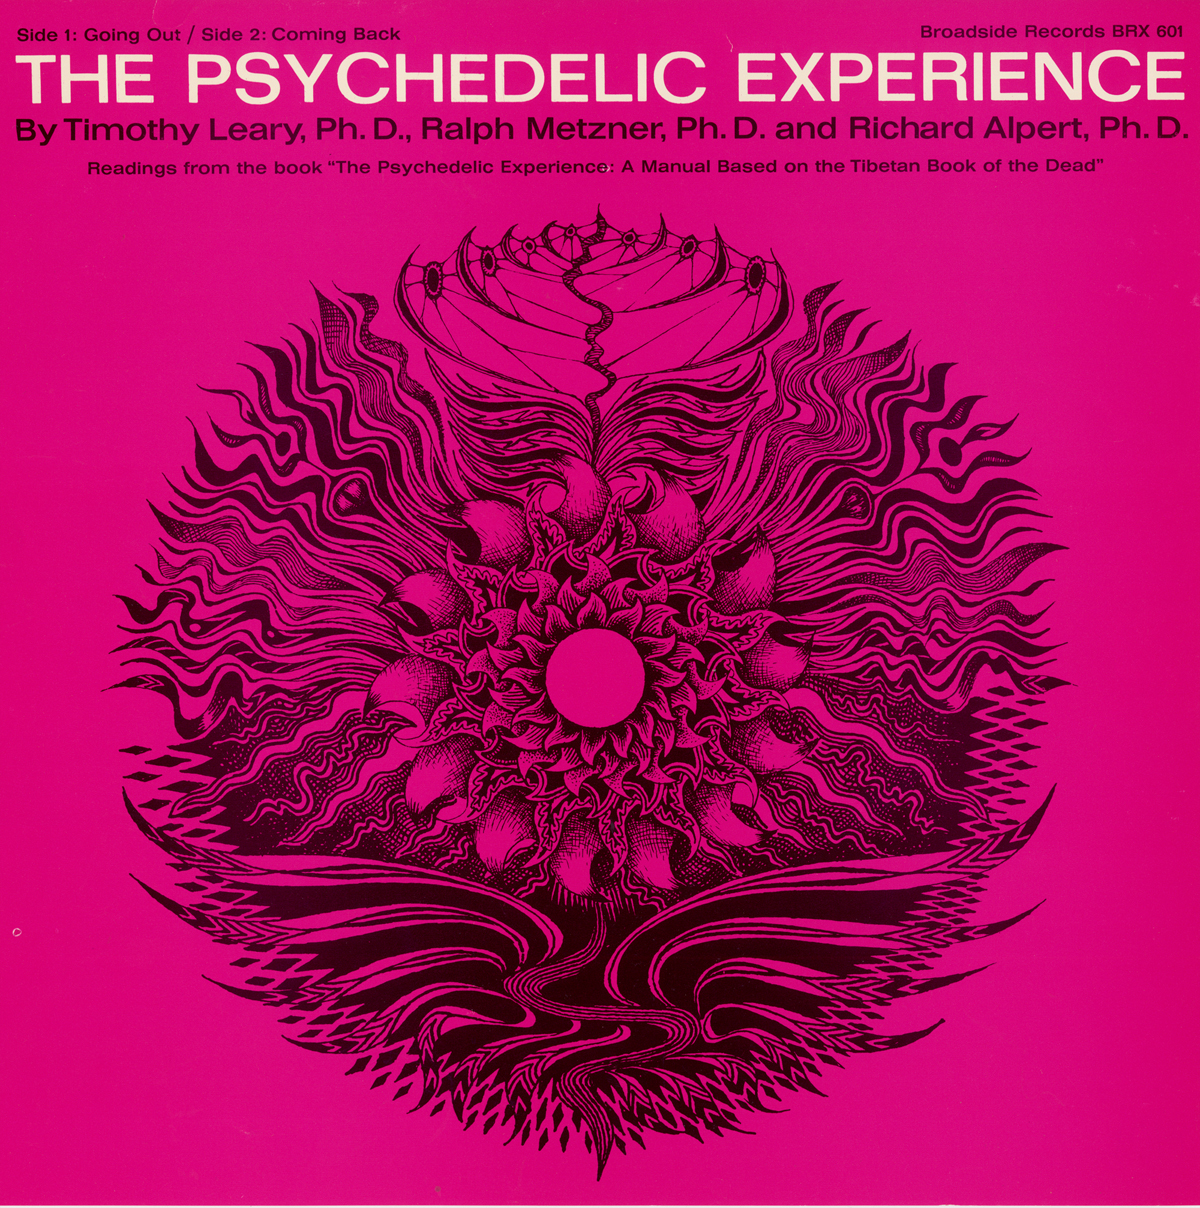 THE PSYCHEDELIC EXPERIENCE: READINGS FROM THE BOOK